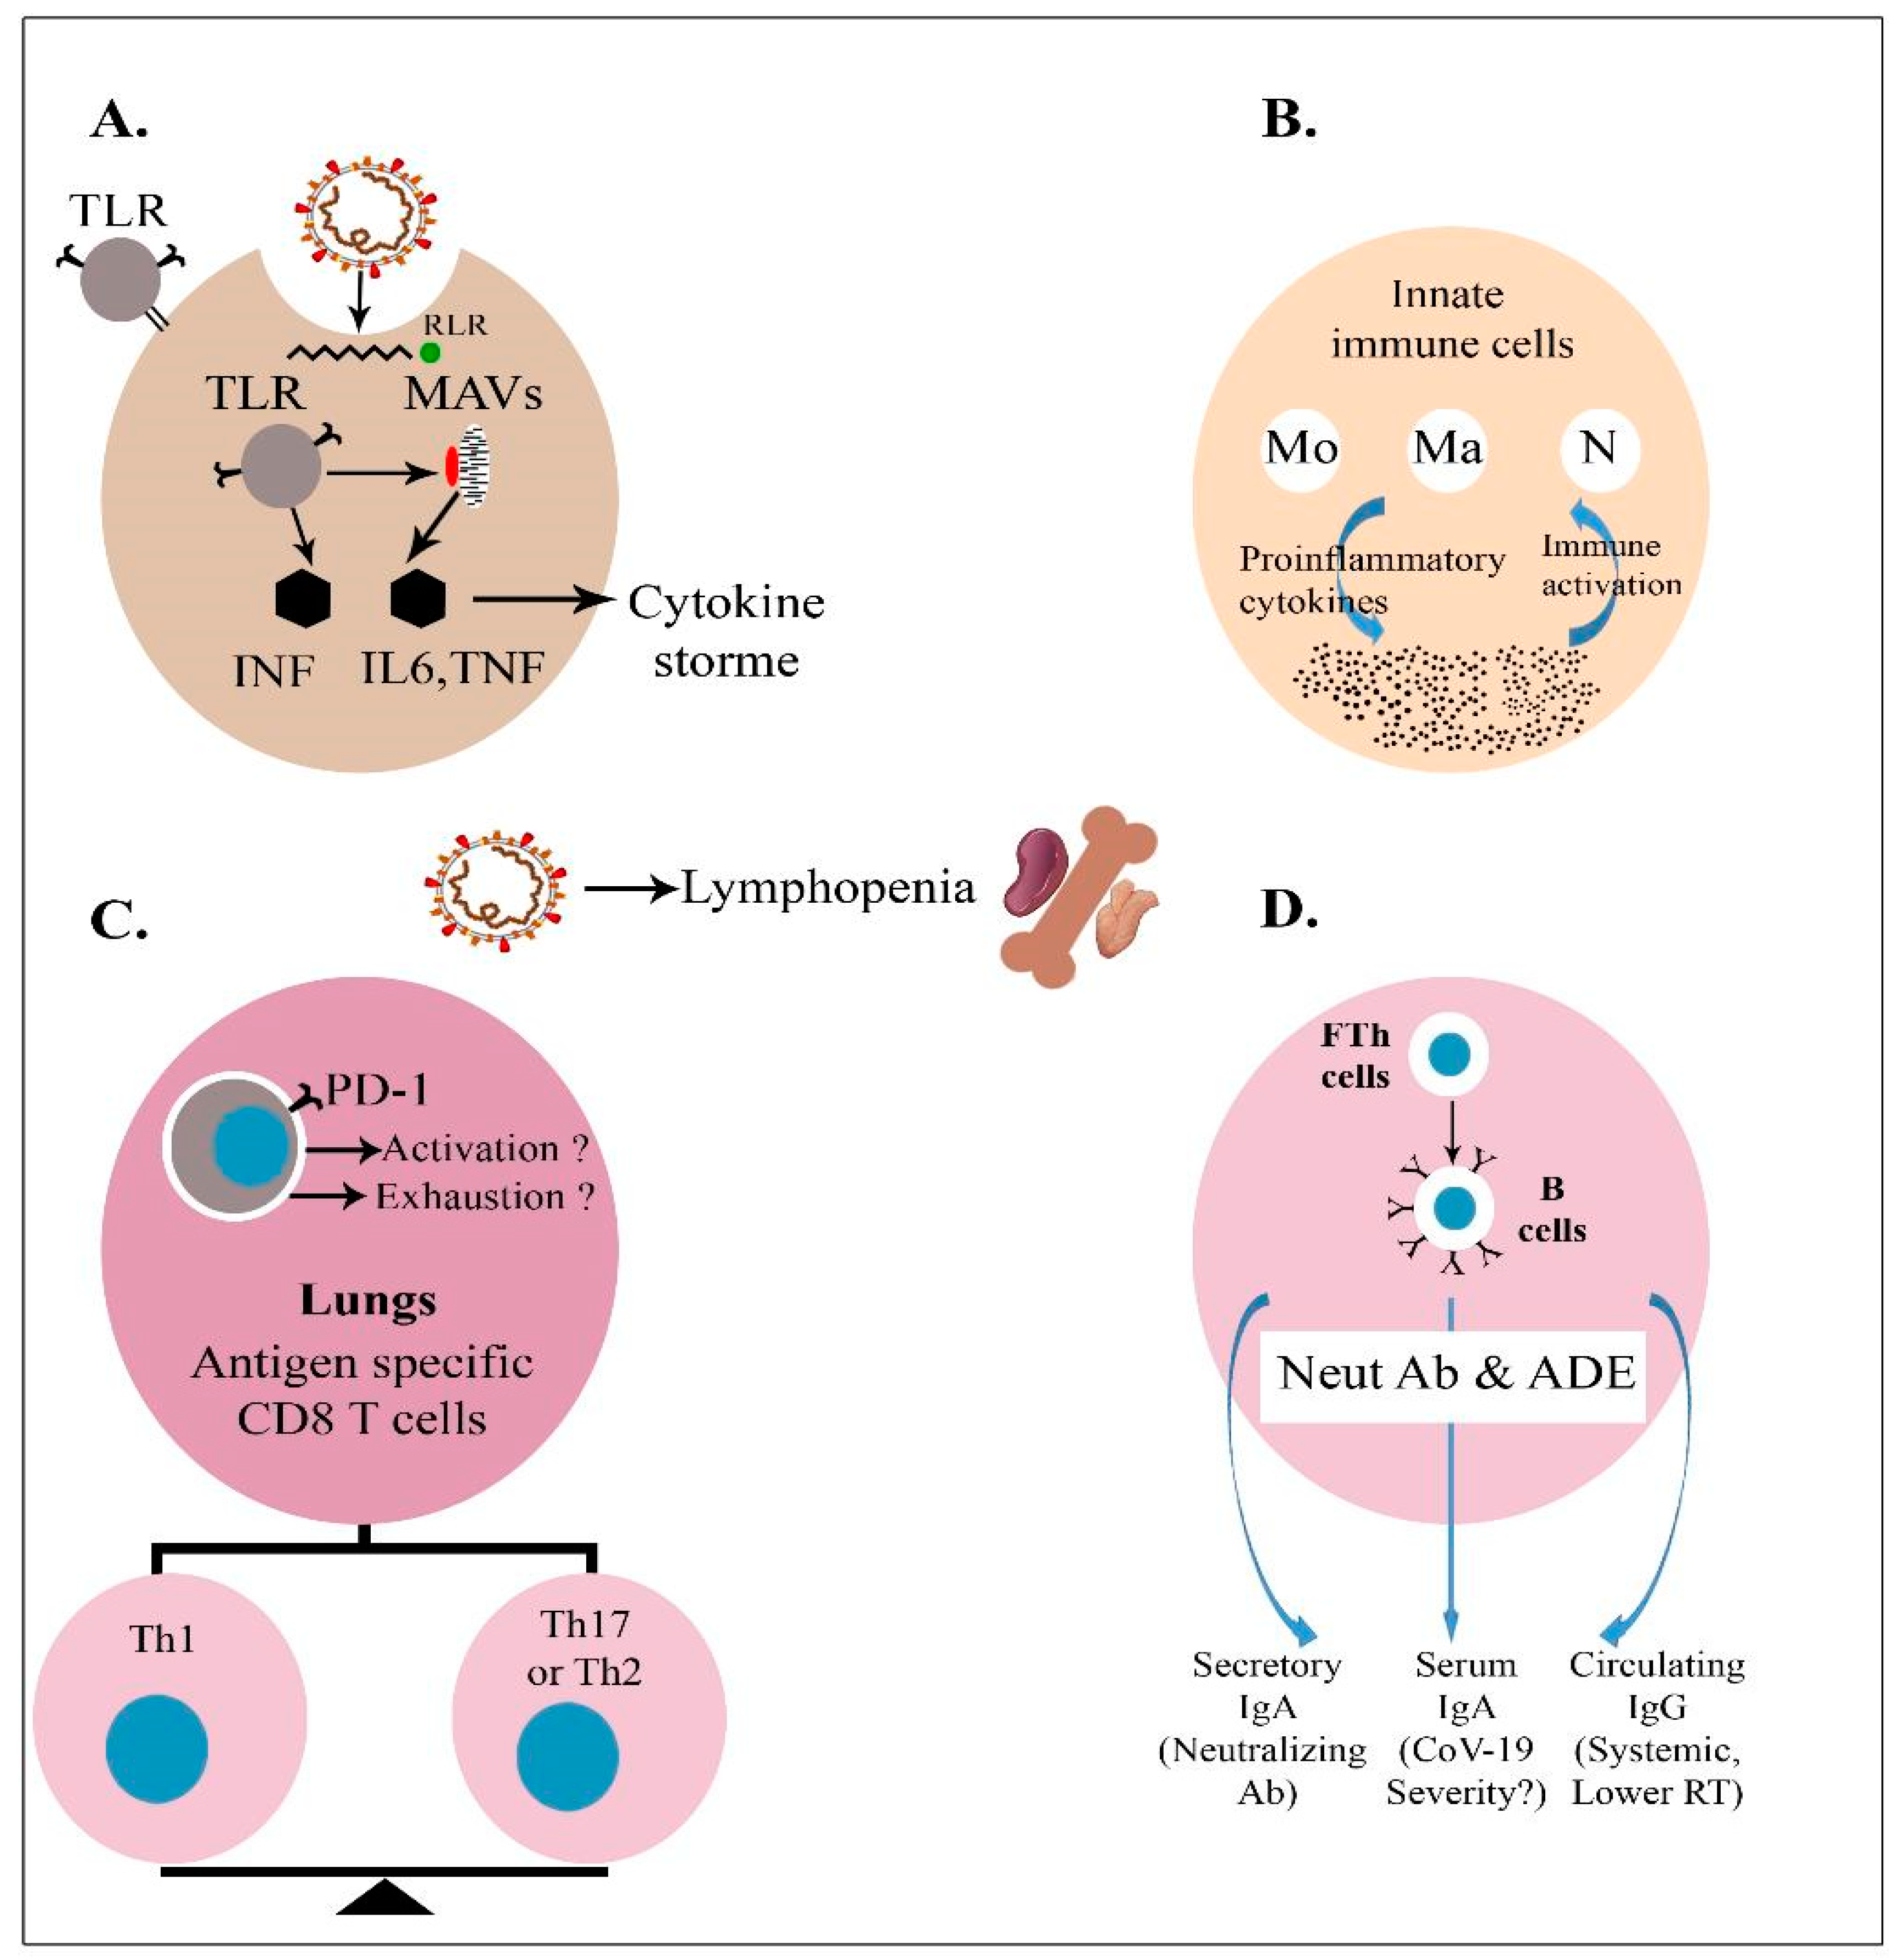 Cell-mediated immunity is essential to prevent reinfection by the